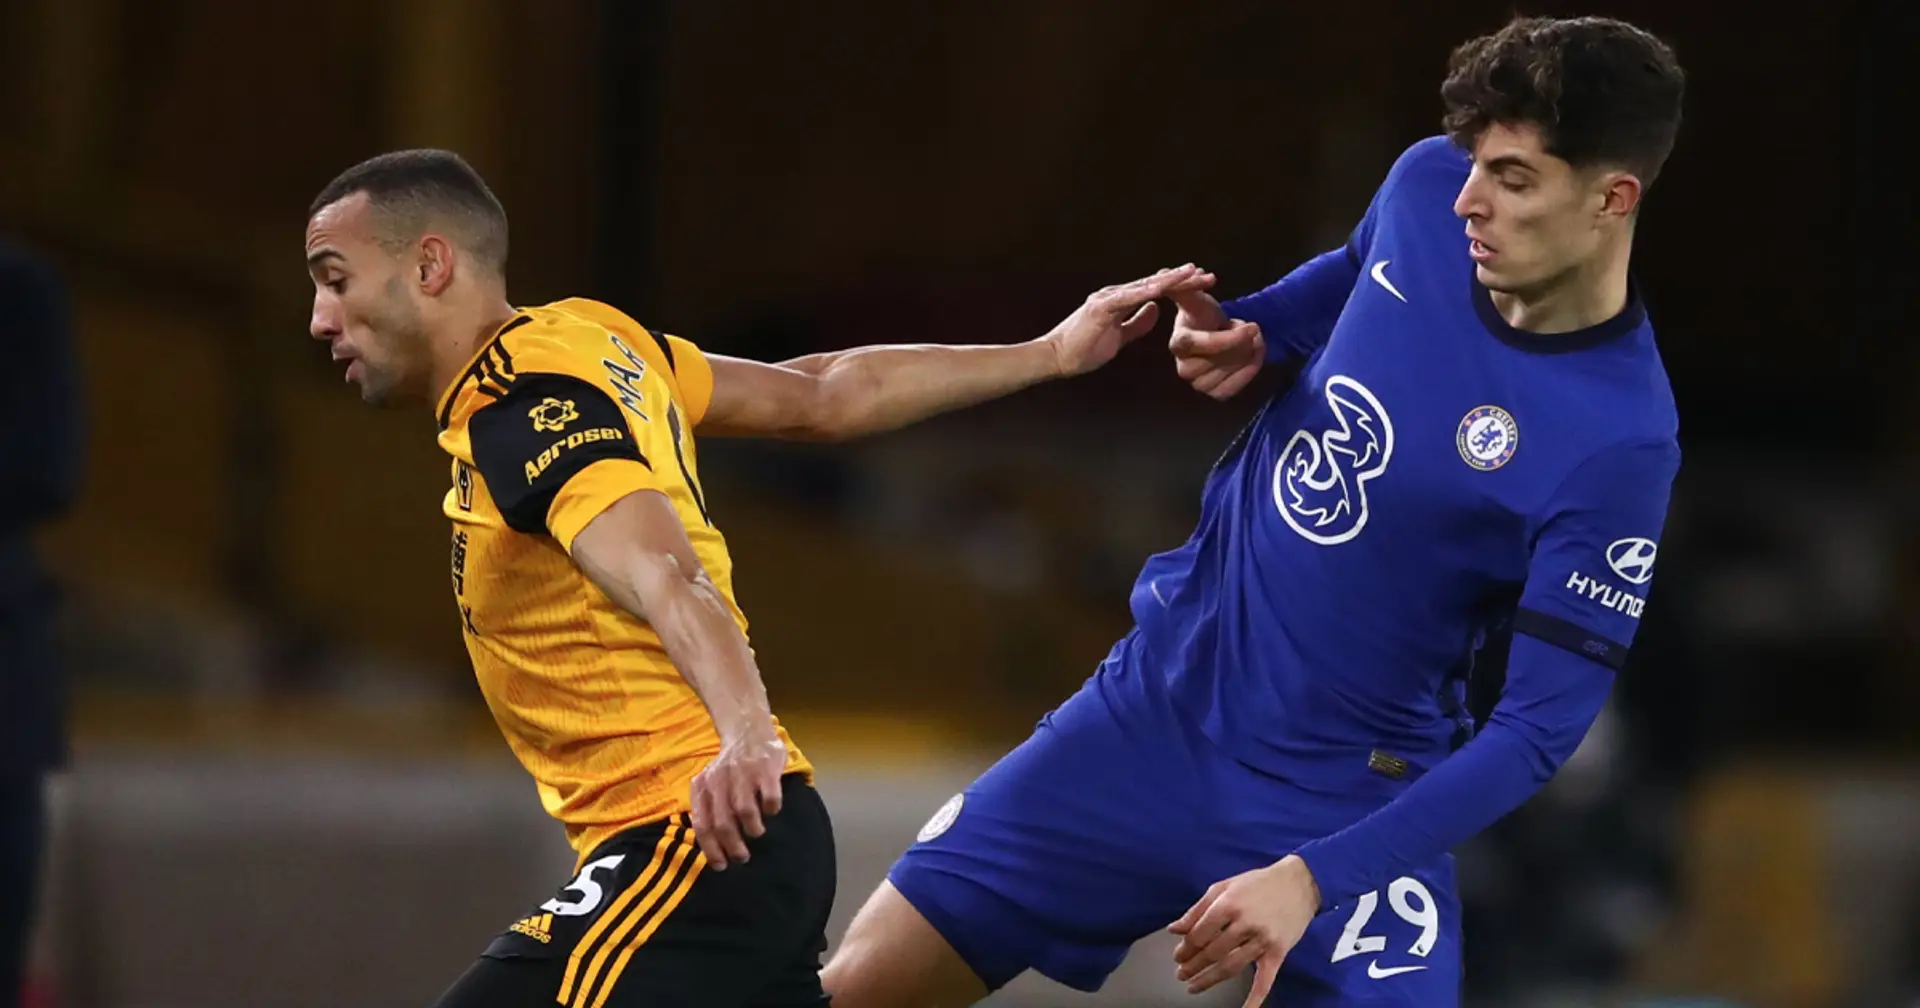 Chelsea vs Wolves: Team news, predicted line-up, score predictions and more - preview